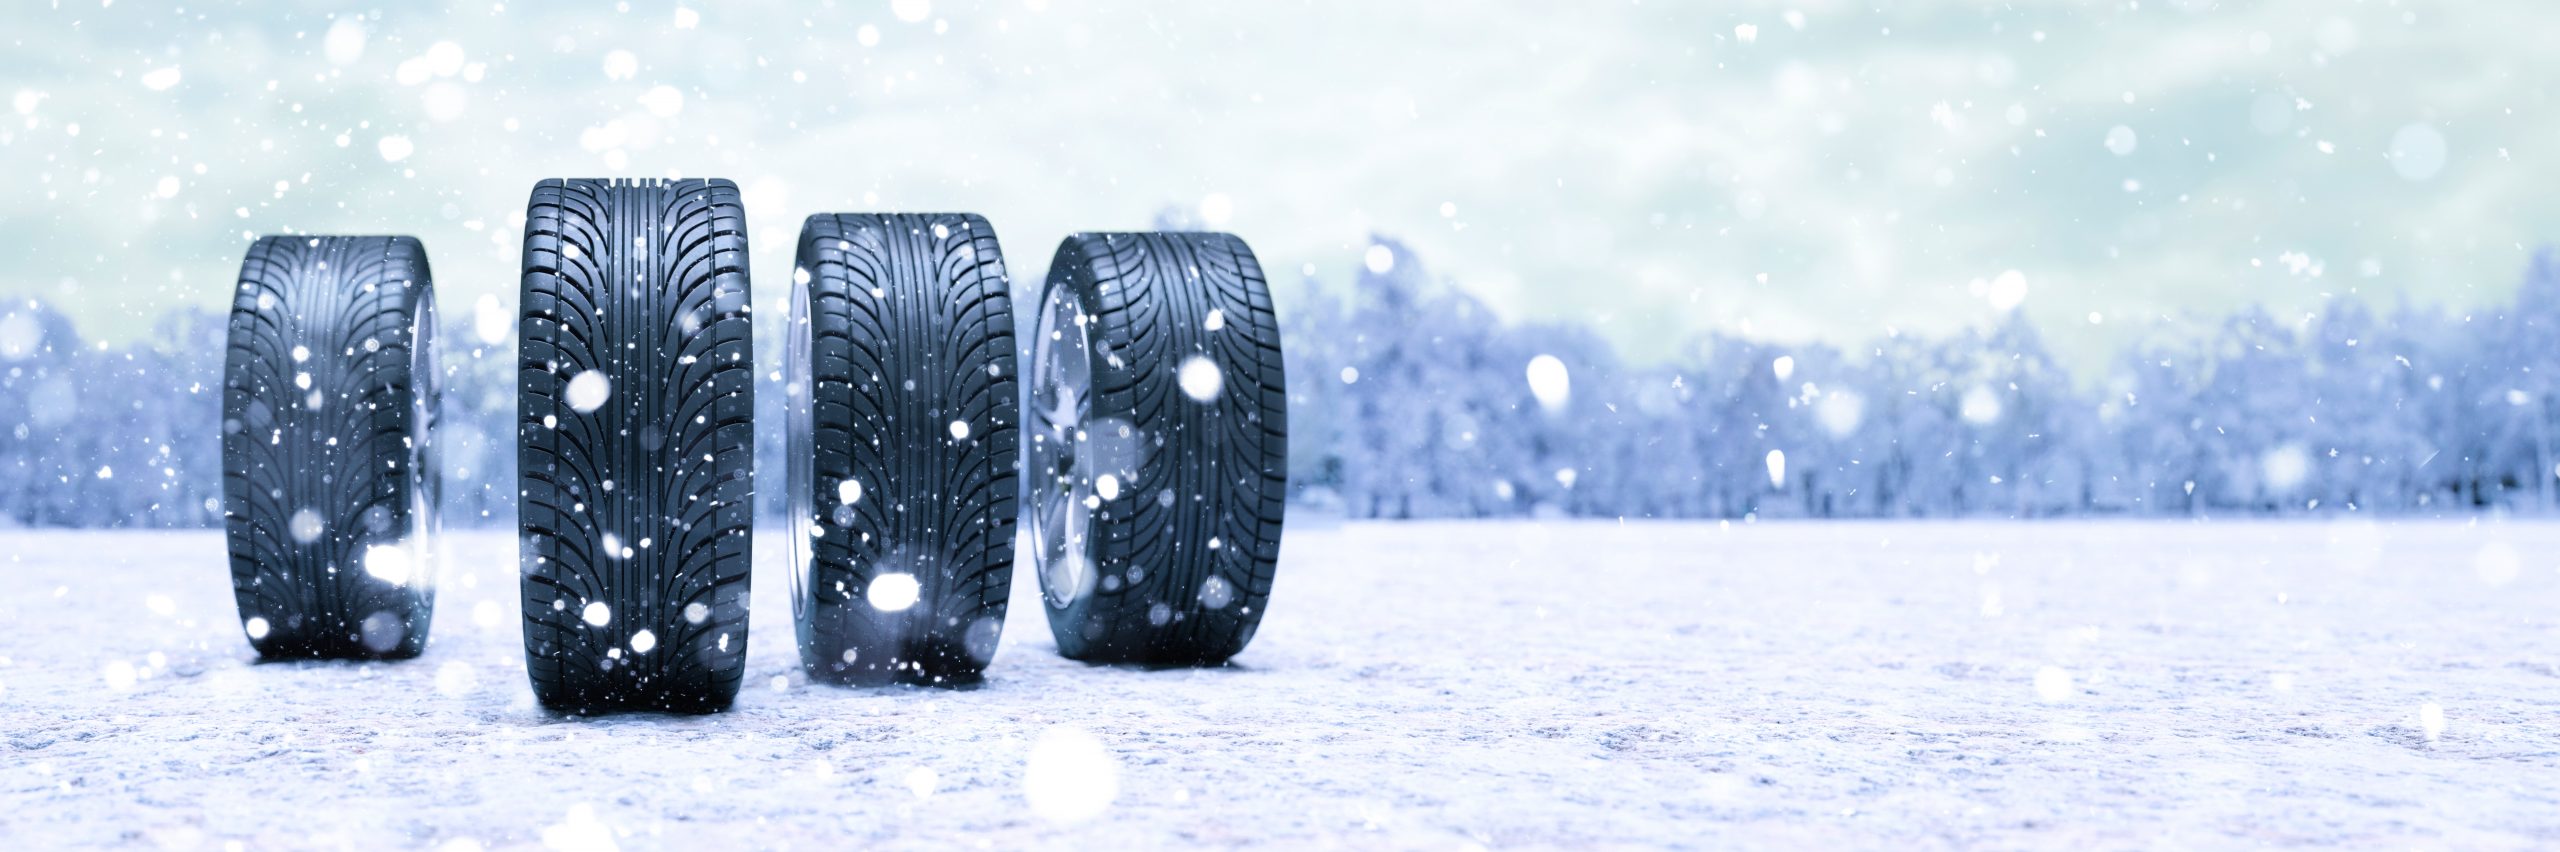 It’s Time to Start Thinking Winter Tires